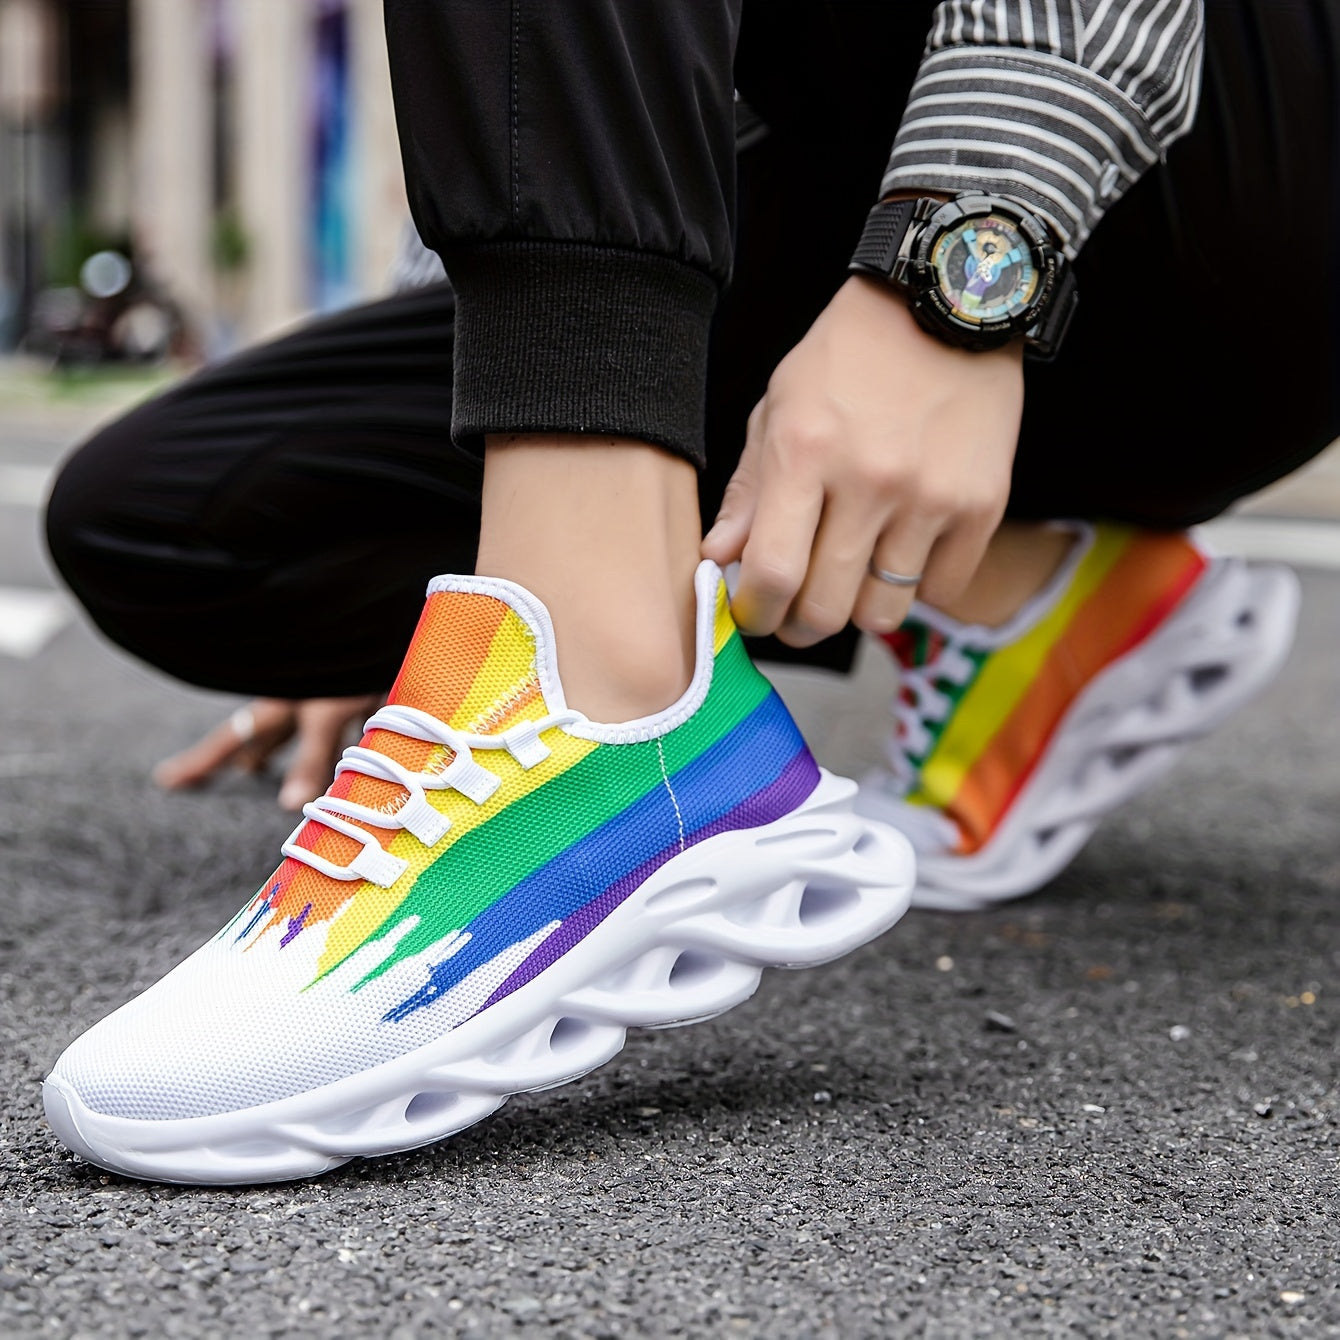 Slip-on Blade Sneakers, Rainbow Color Athletic Shoes